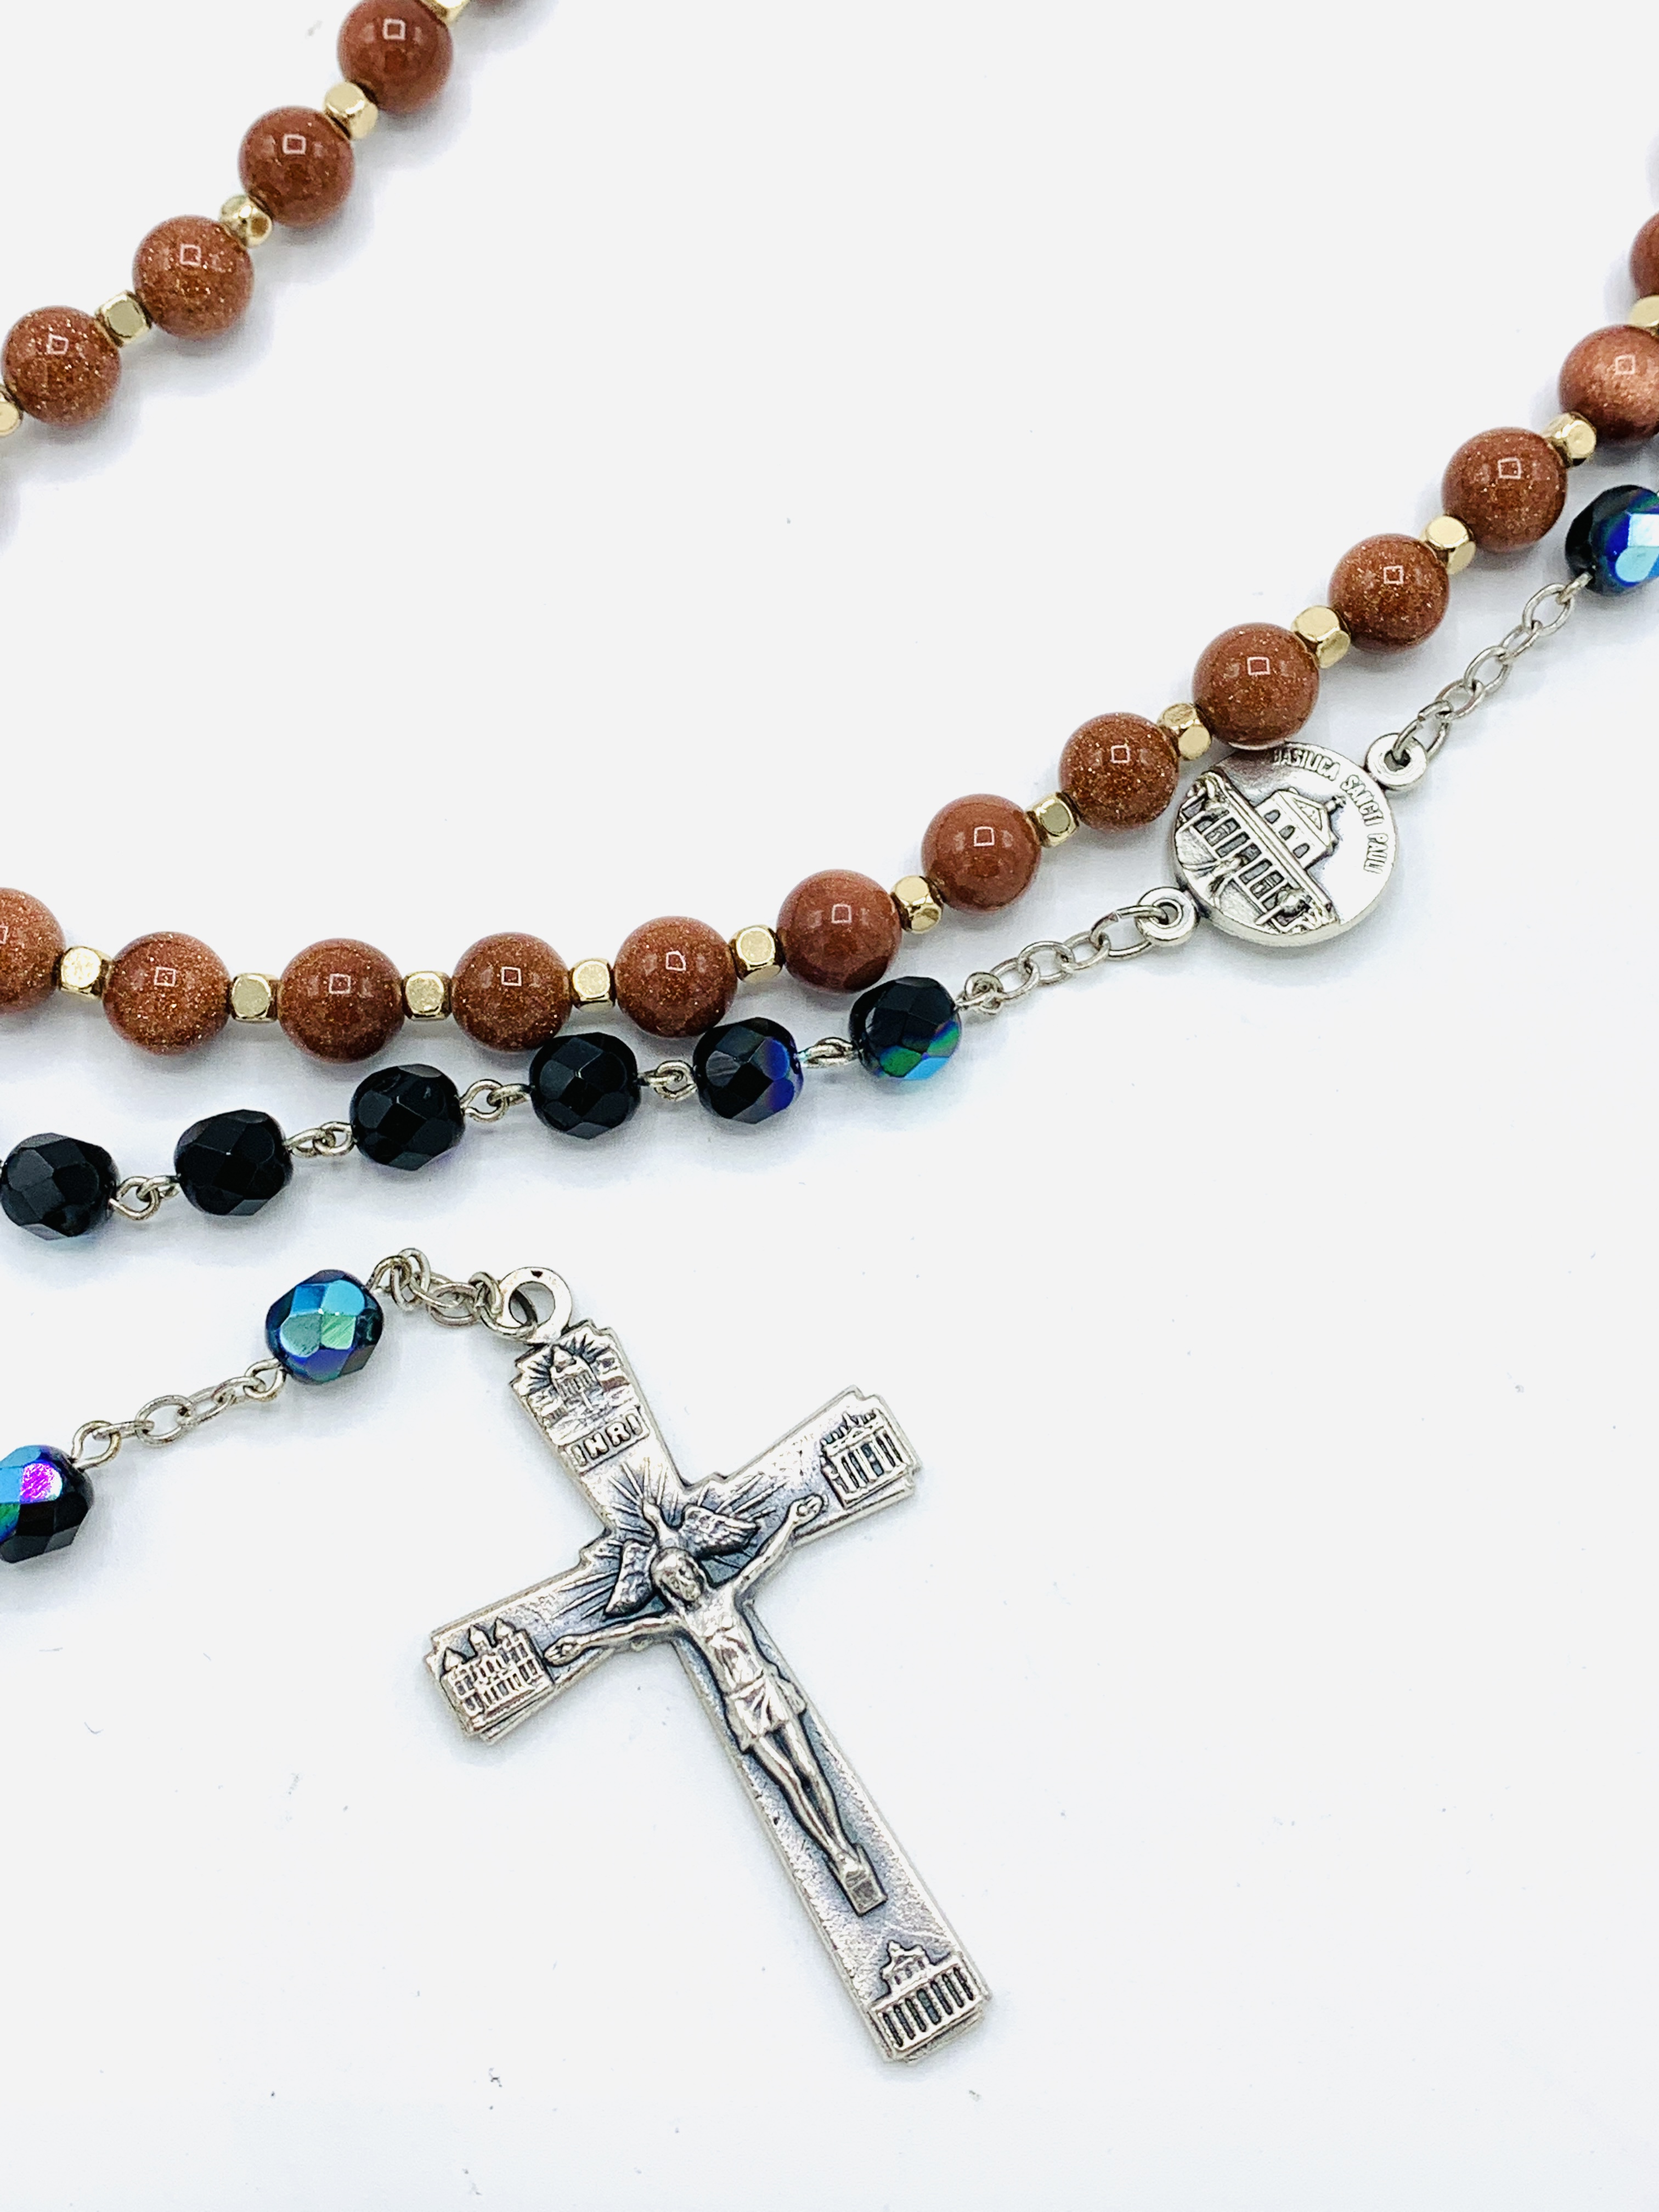 Rosary and prayer beads. - Image 3 of 4